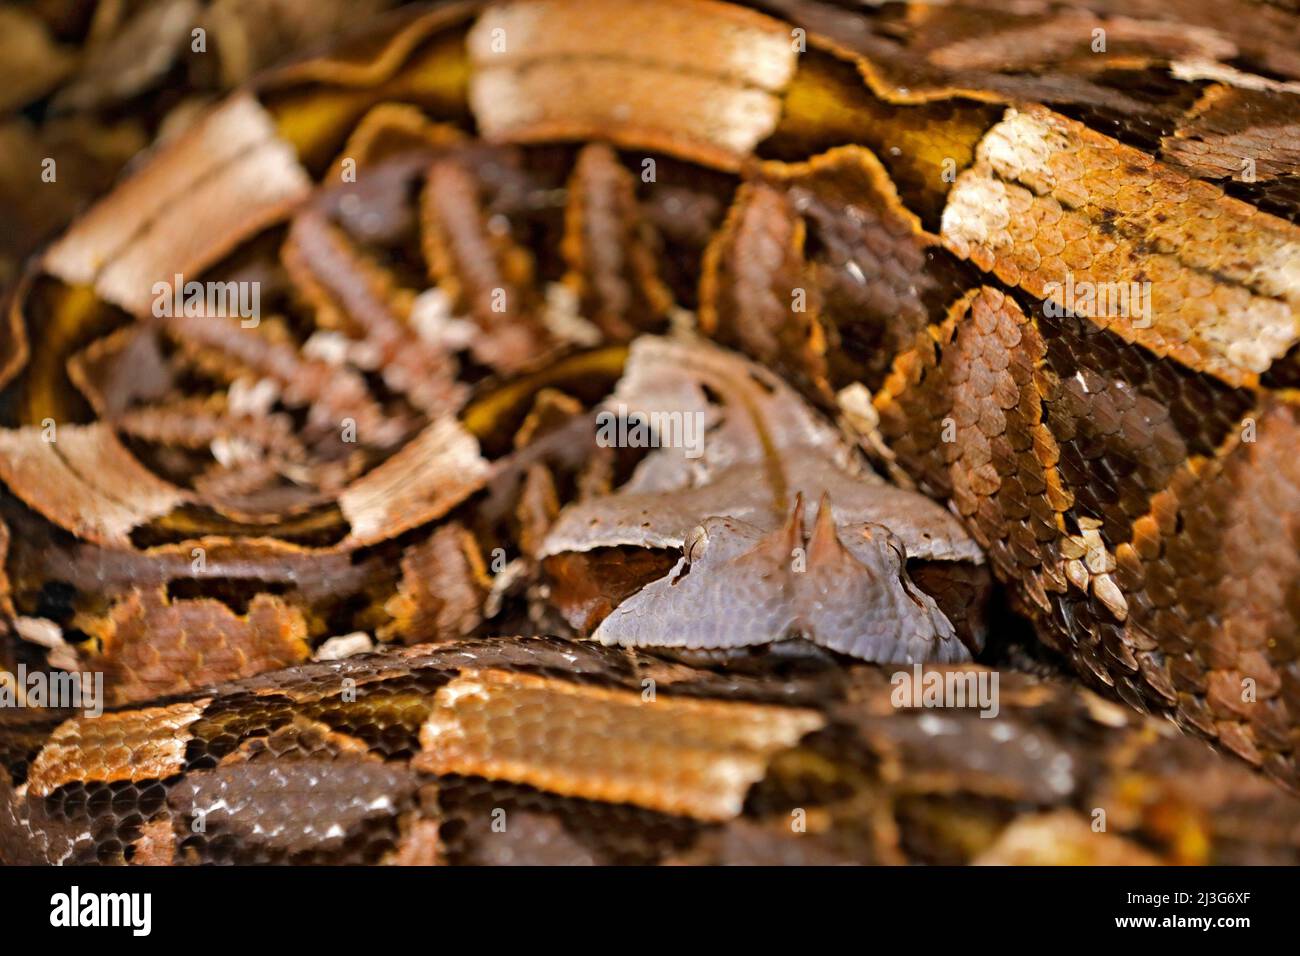 The Gaboon viper, Bitis gabonica, Congo, Africa. World's longest snakes, art view on nature. Python in nature habitat, India, Thailand. Snake from for Stock Photo